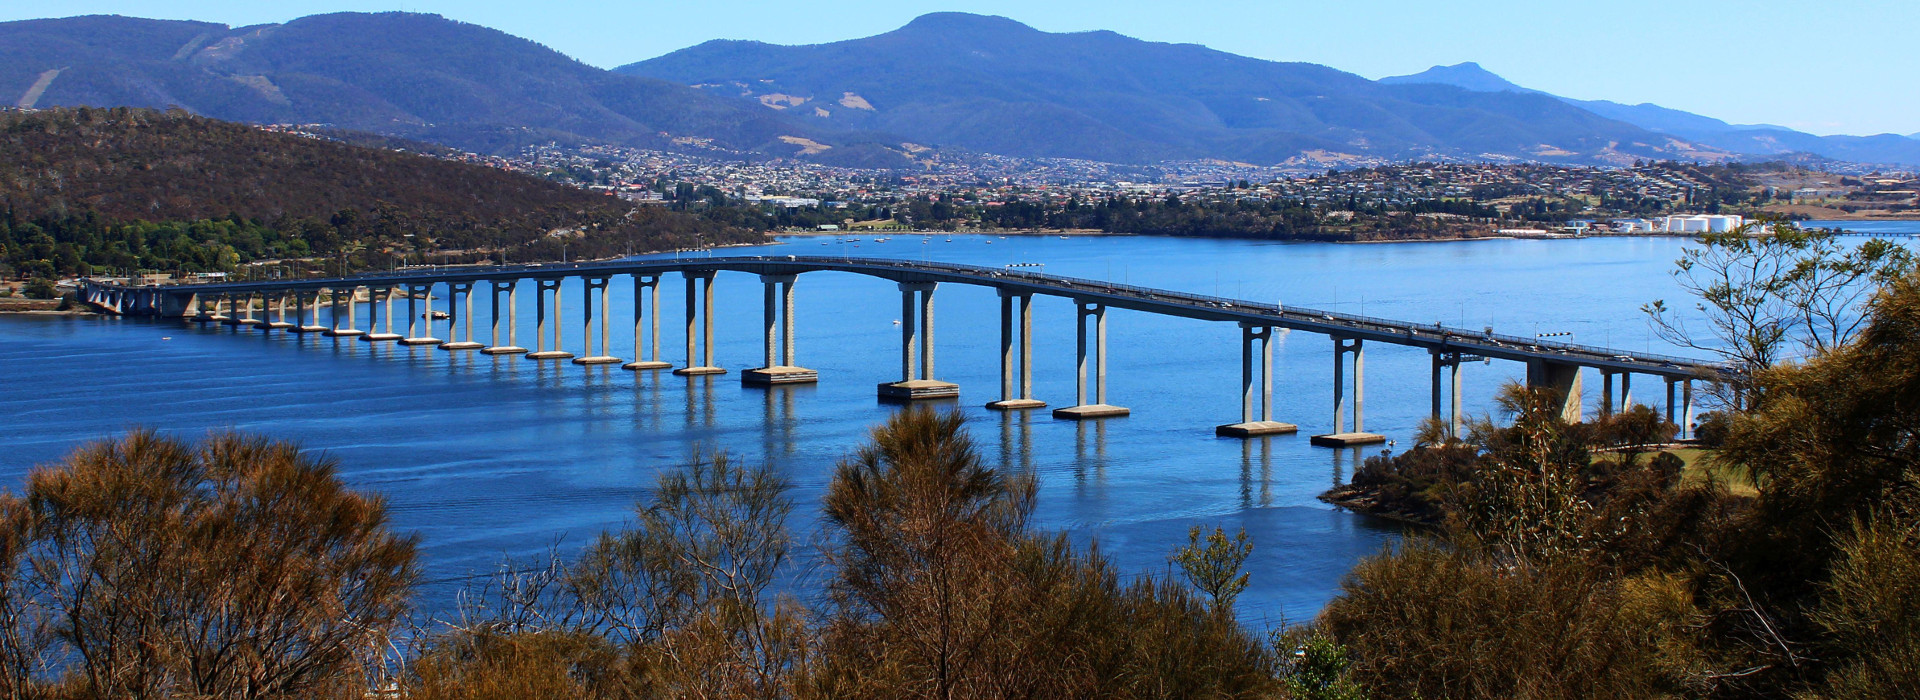 The Tasman Bridge from Rosny Hill Lookout @crk365